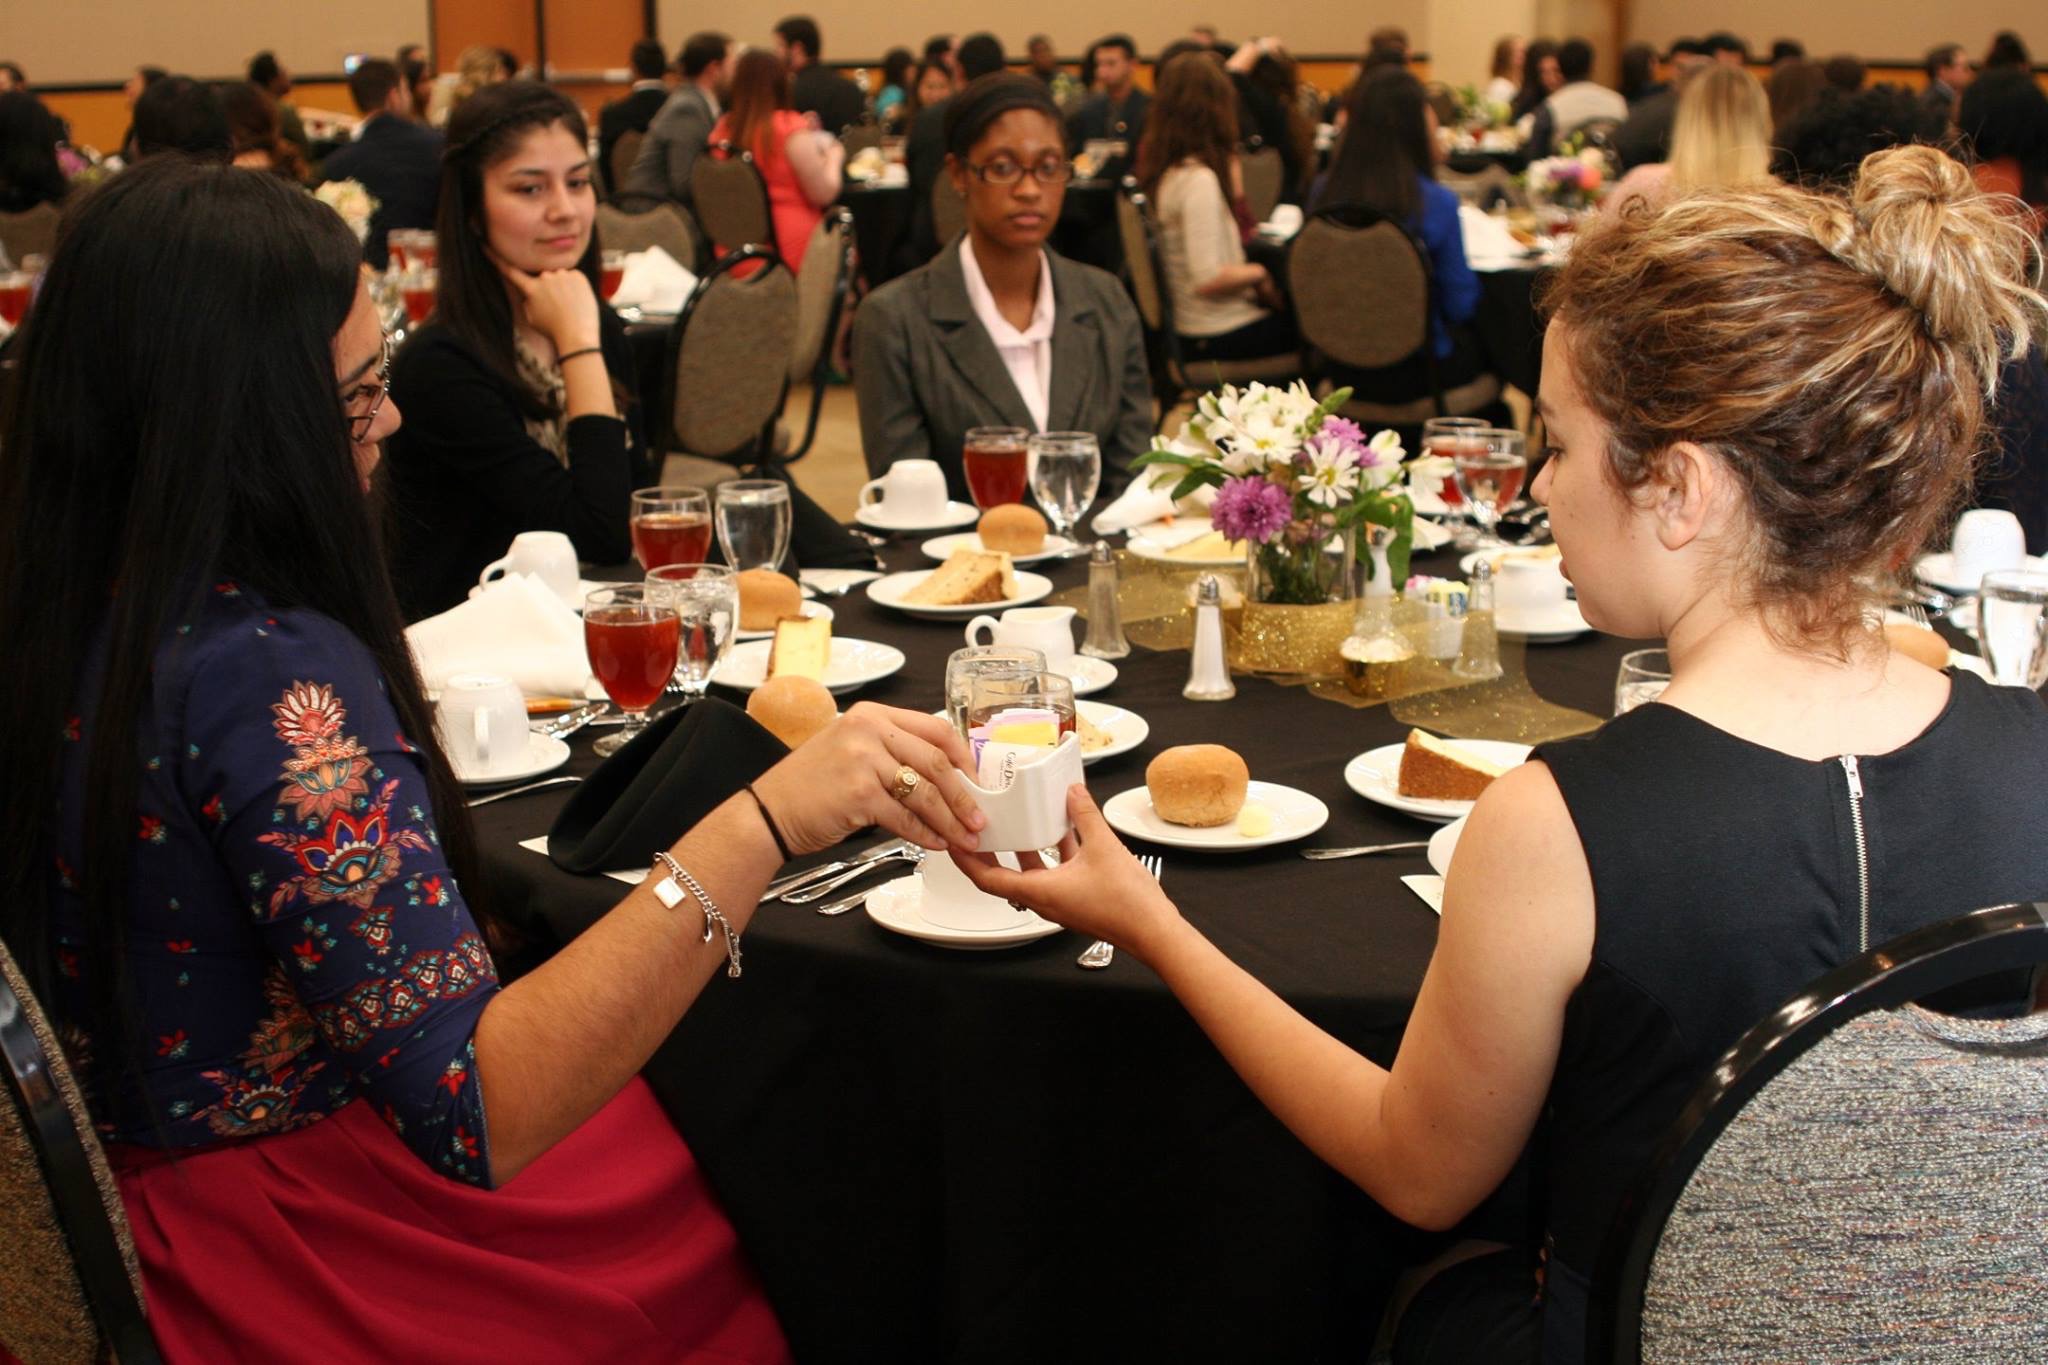 Students pass something between themselves at the Etiquette Dinner.